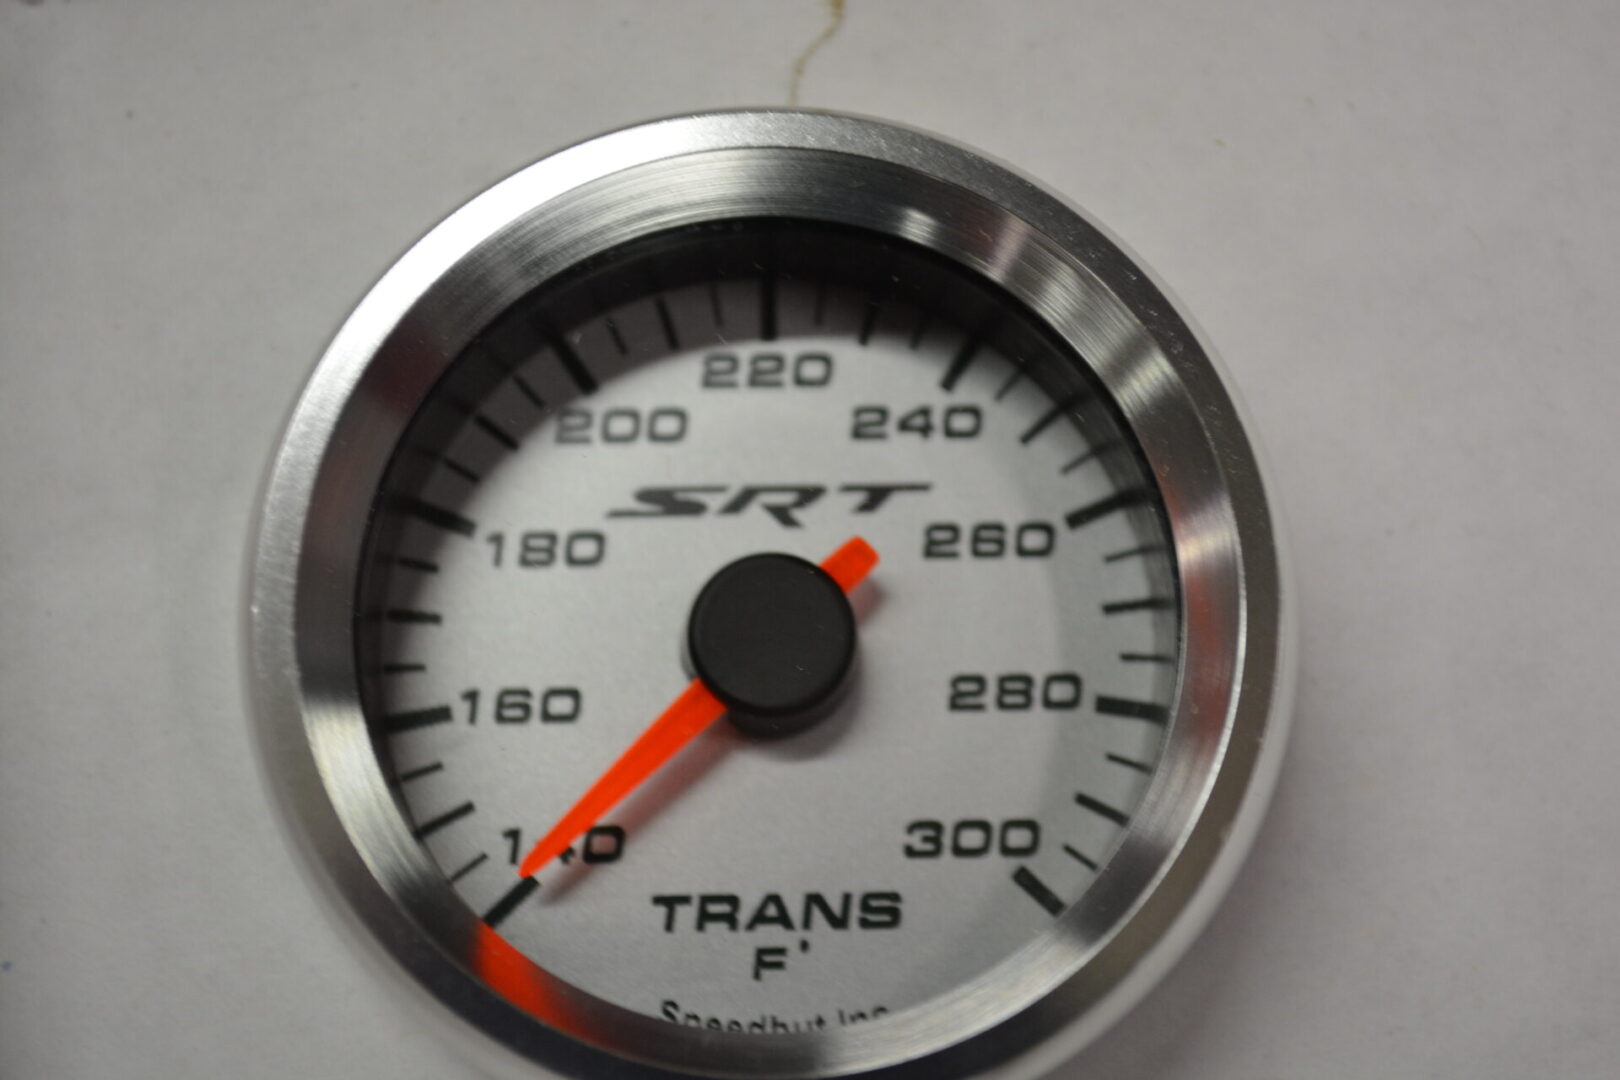 A white and silver gauge with red needle.